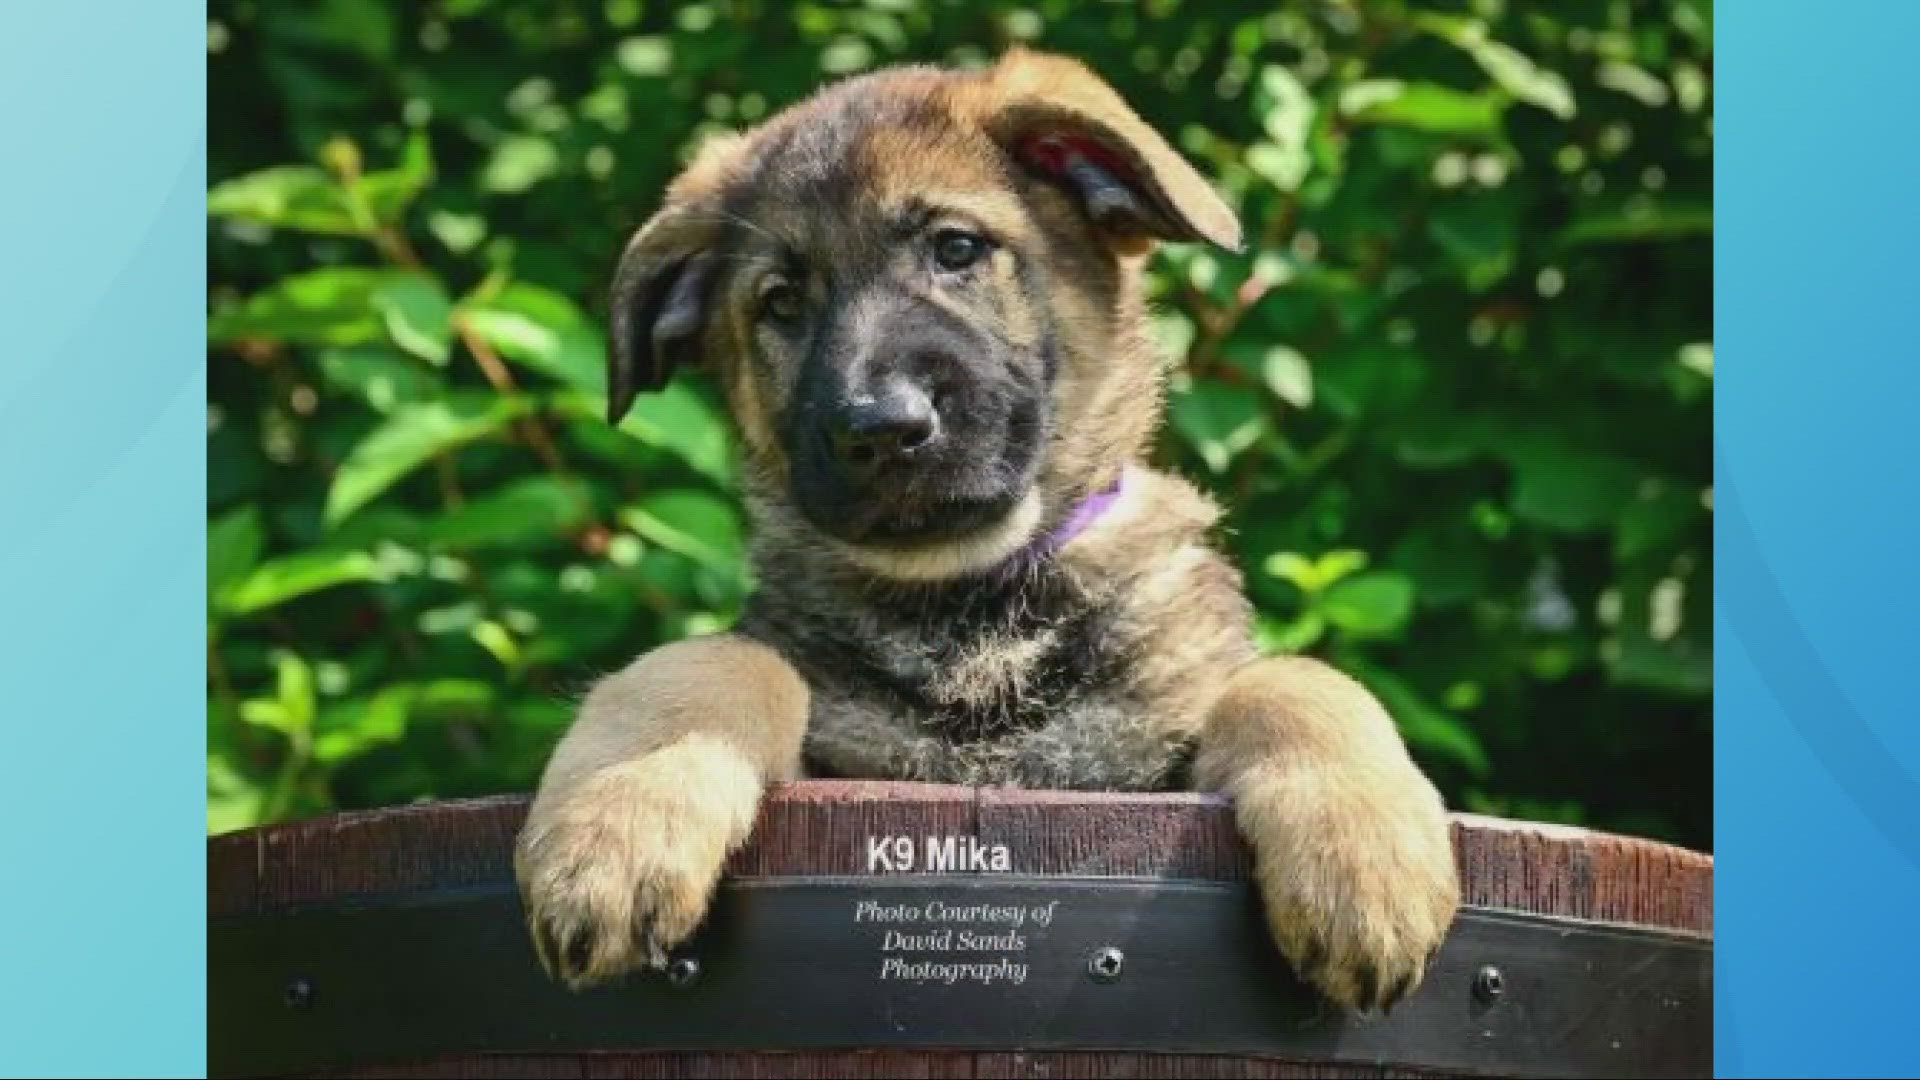 K-9 Mika is bred from former Twinsburg K-9 Officer Bagio, whose partner Josh Miktarian was killed in the line of duty back in 2008.